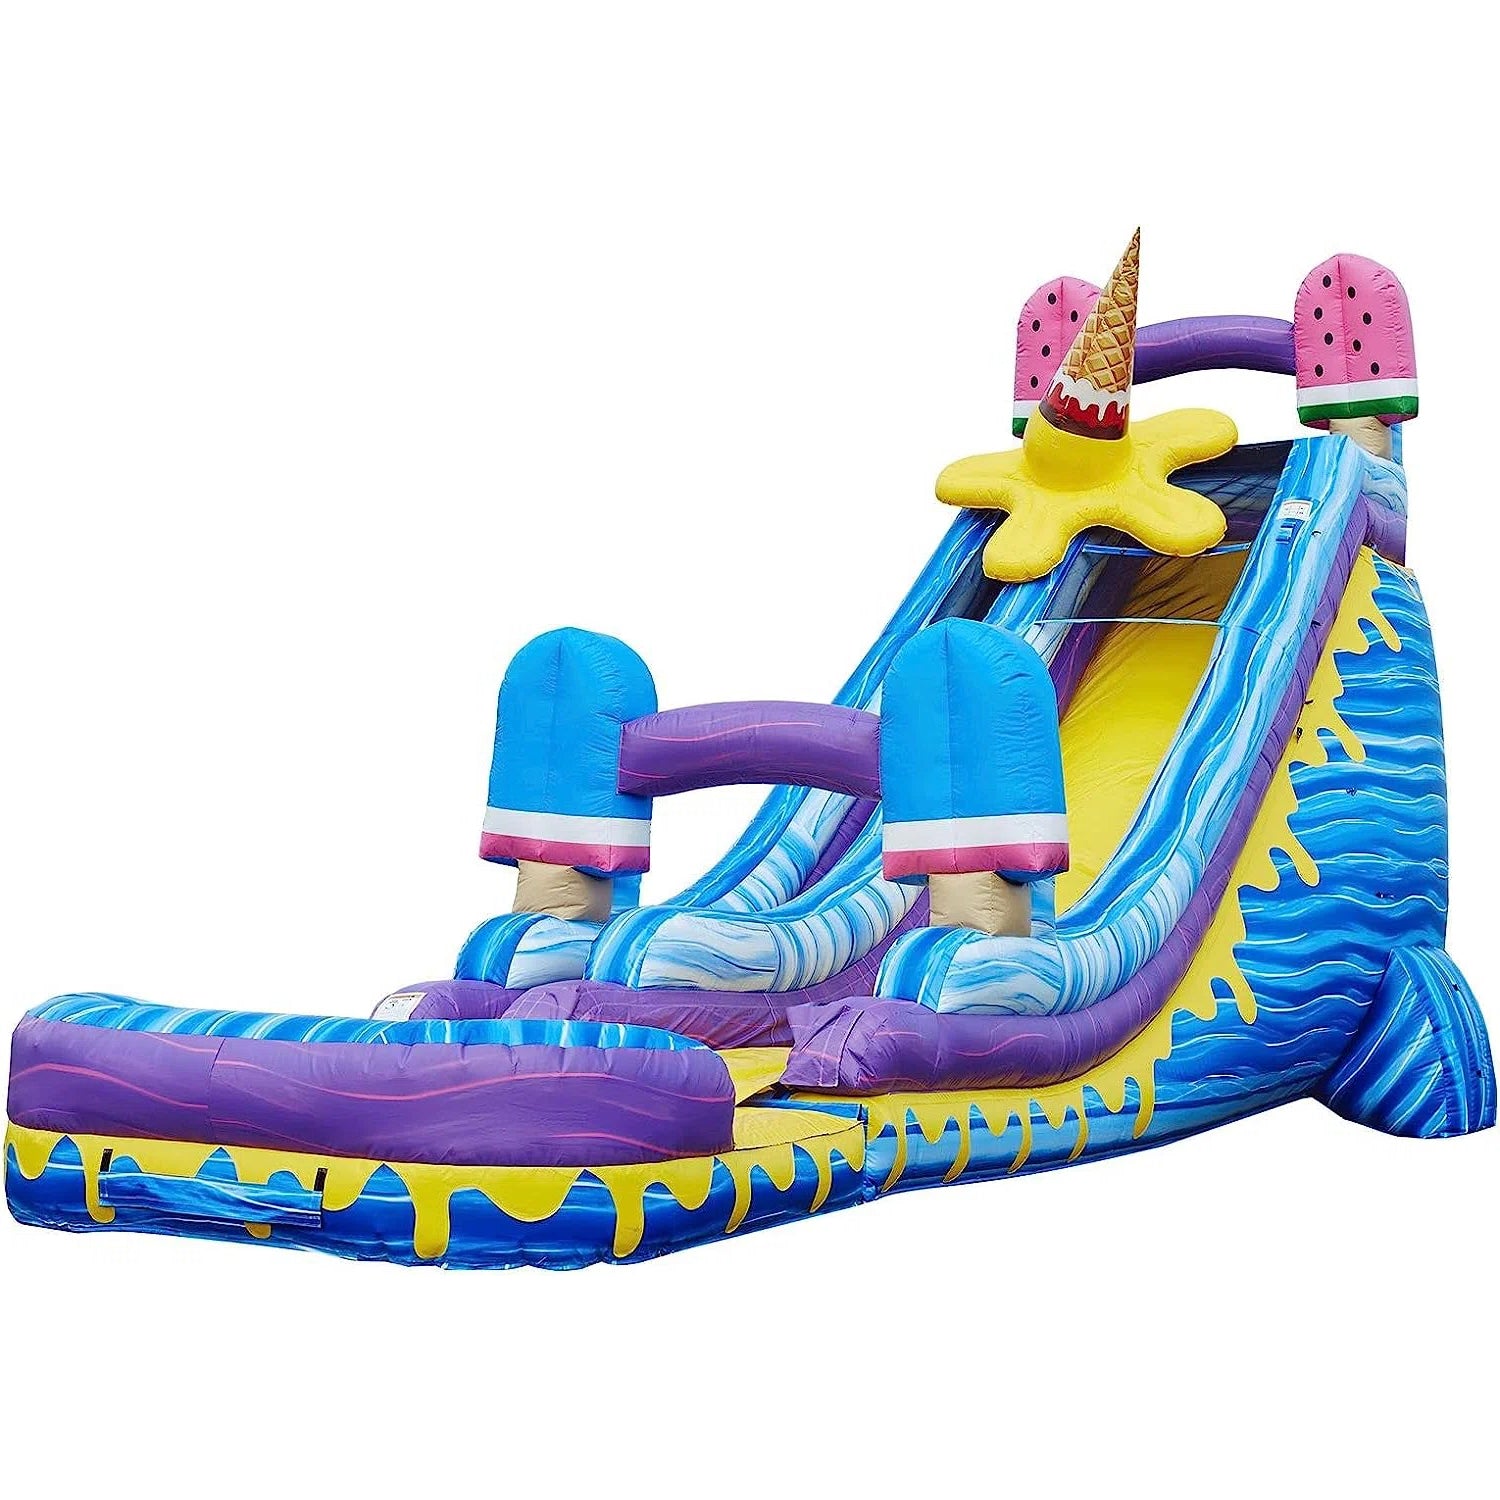 Ice Pops Water Slide With Attached Deep Pool Air My Fun Inflatable Waterslide Birthday Party